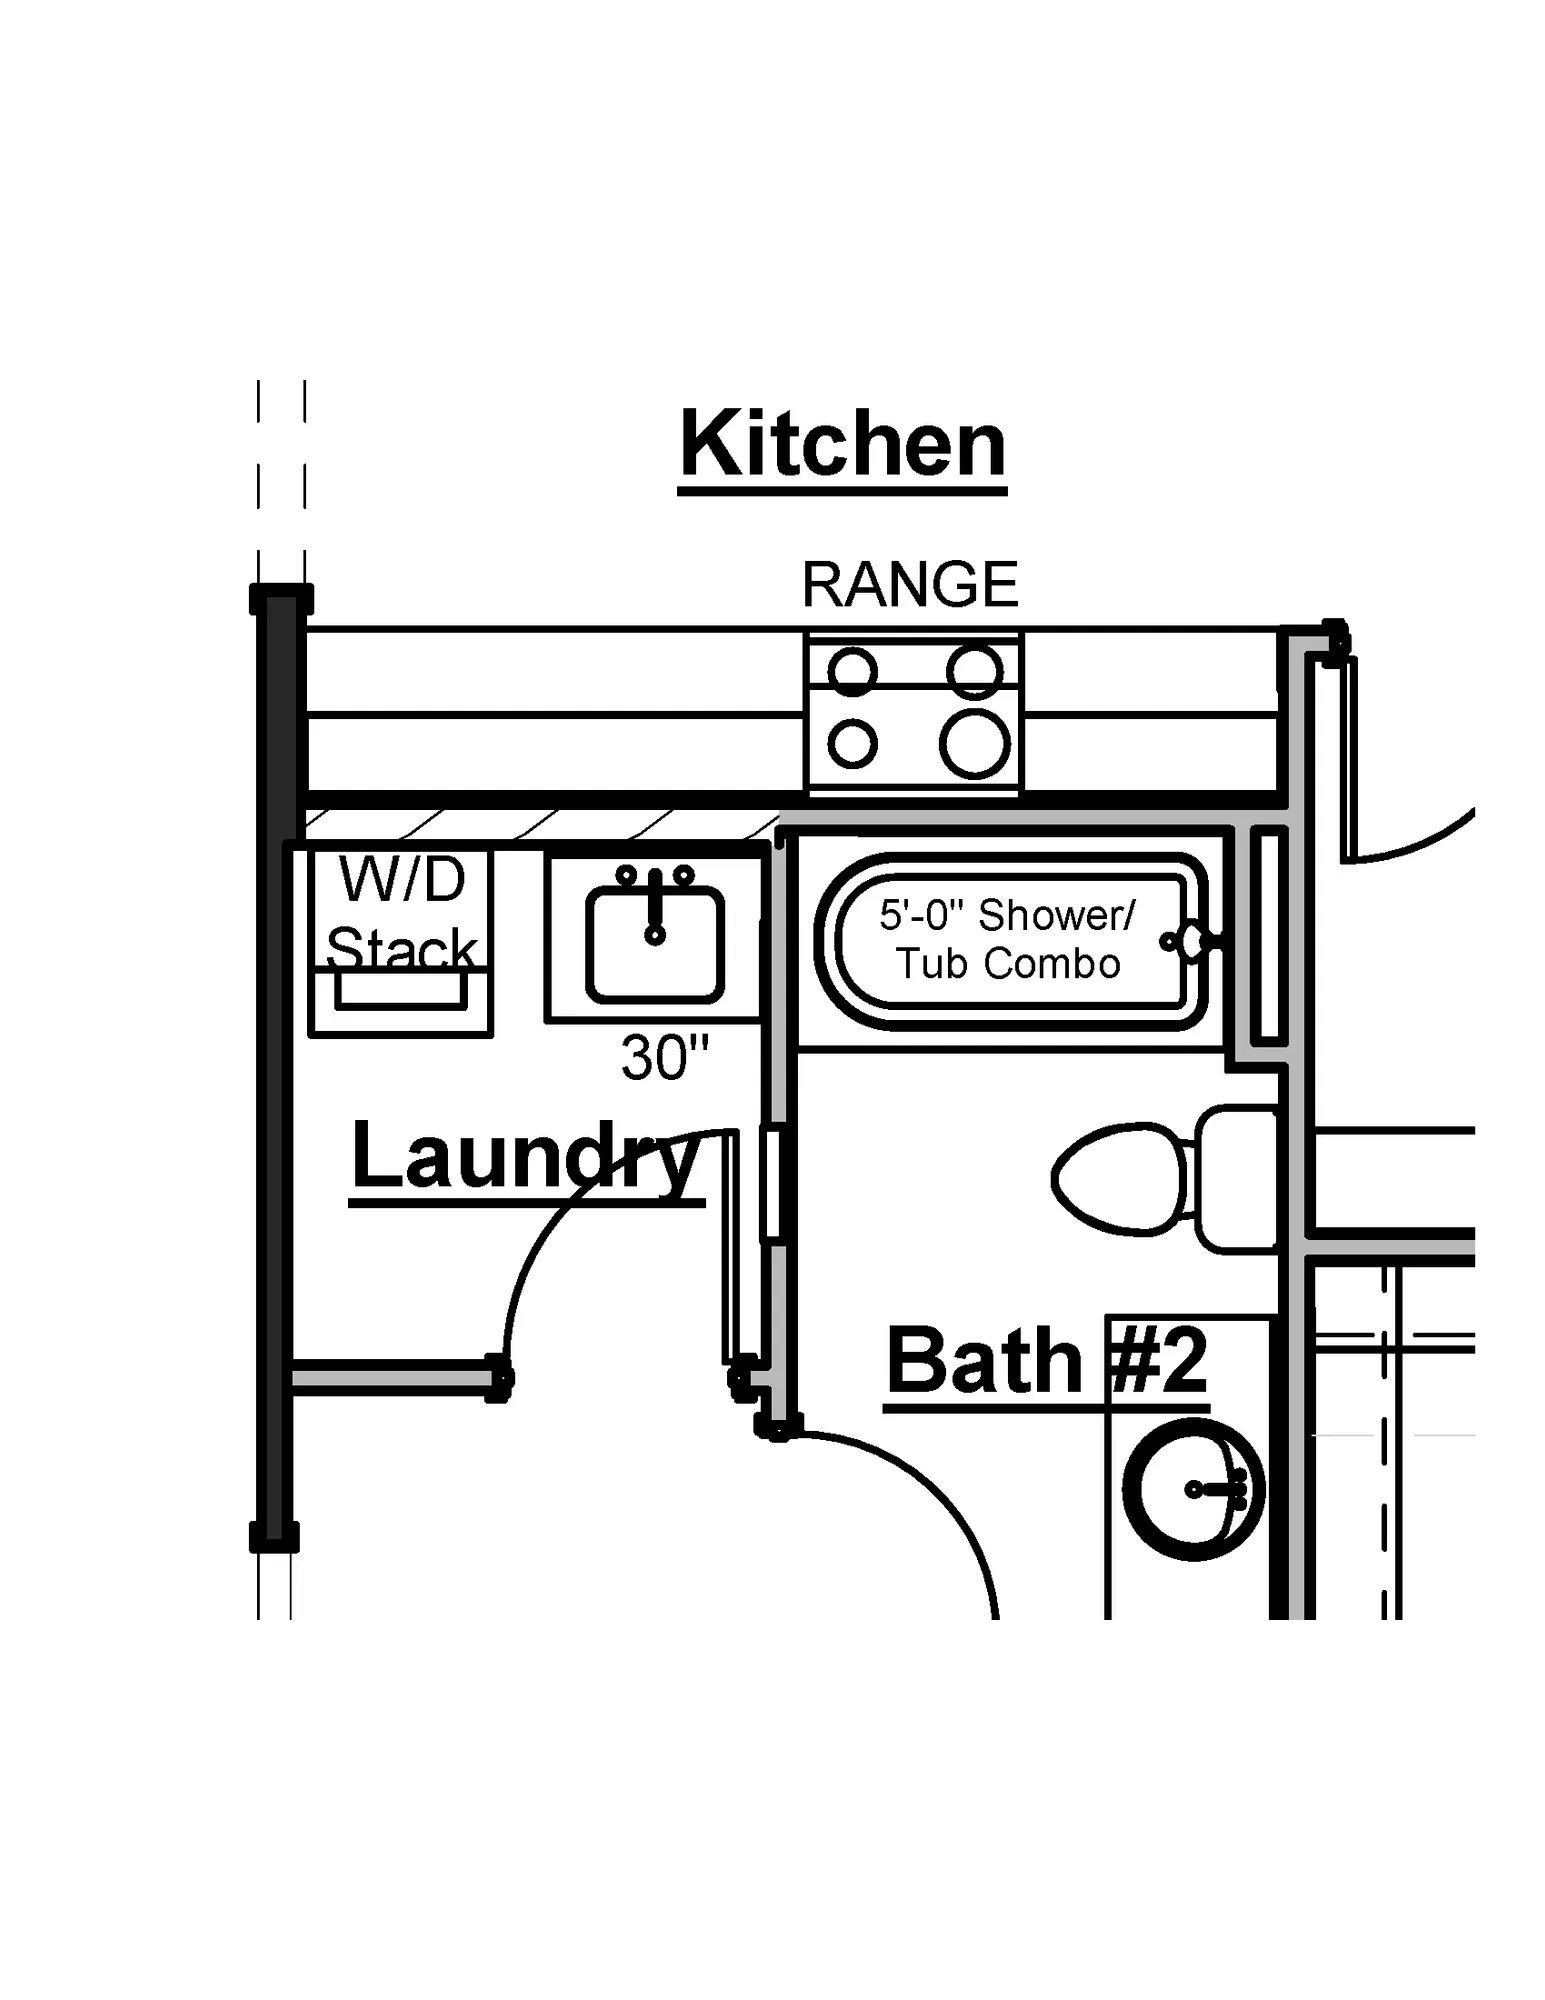 Laundry Sink with Washer Dryer Stack - undefined